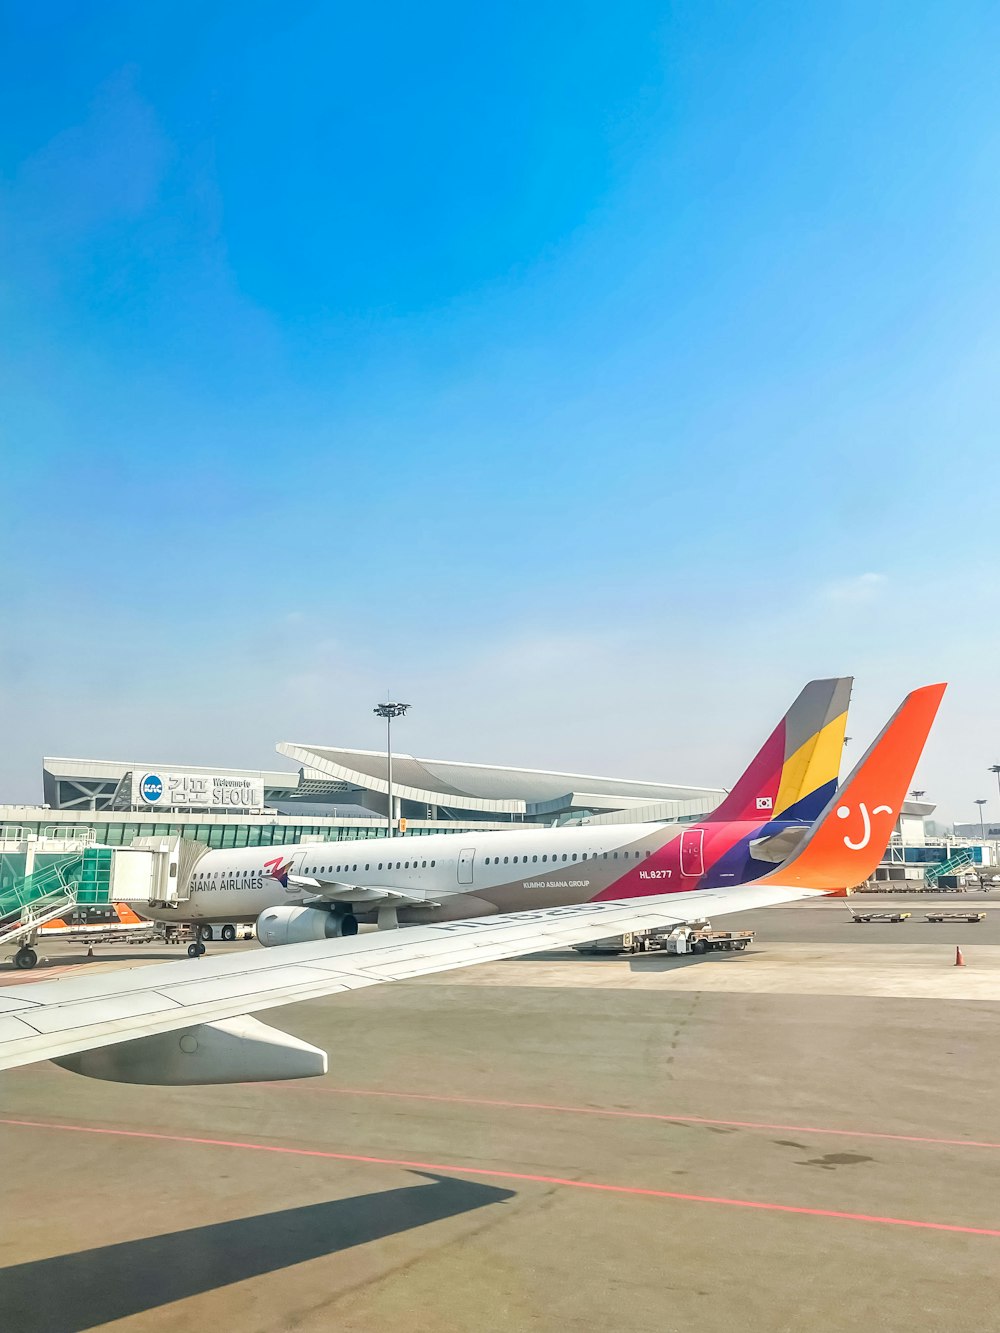 a colorful airplane is parked at an airport